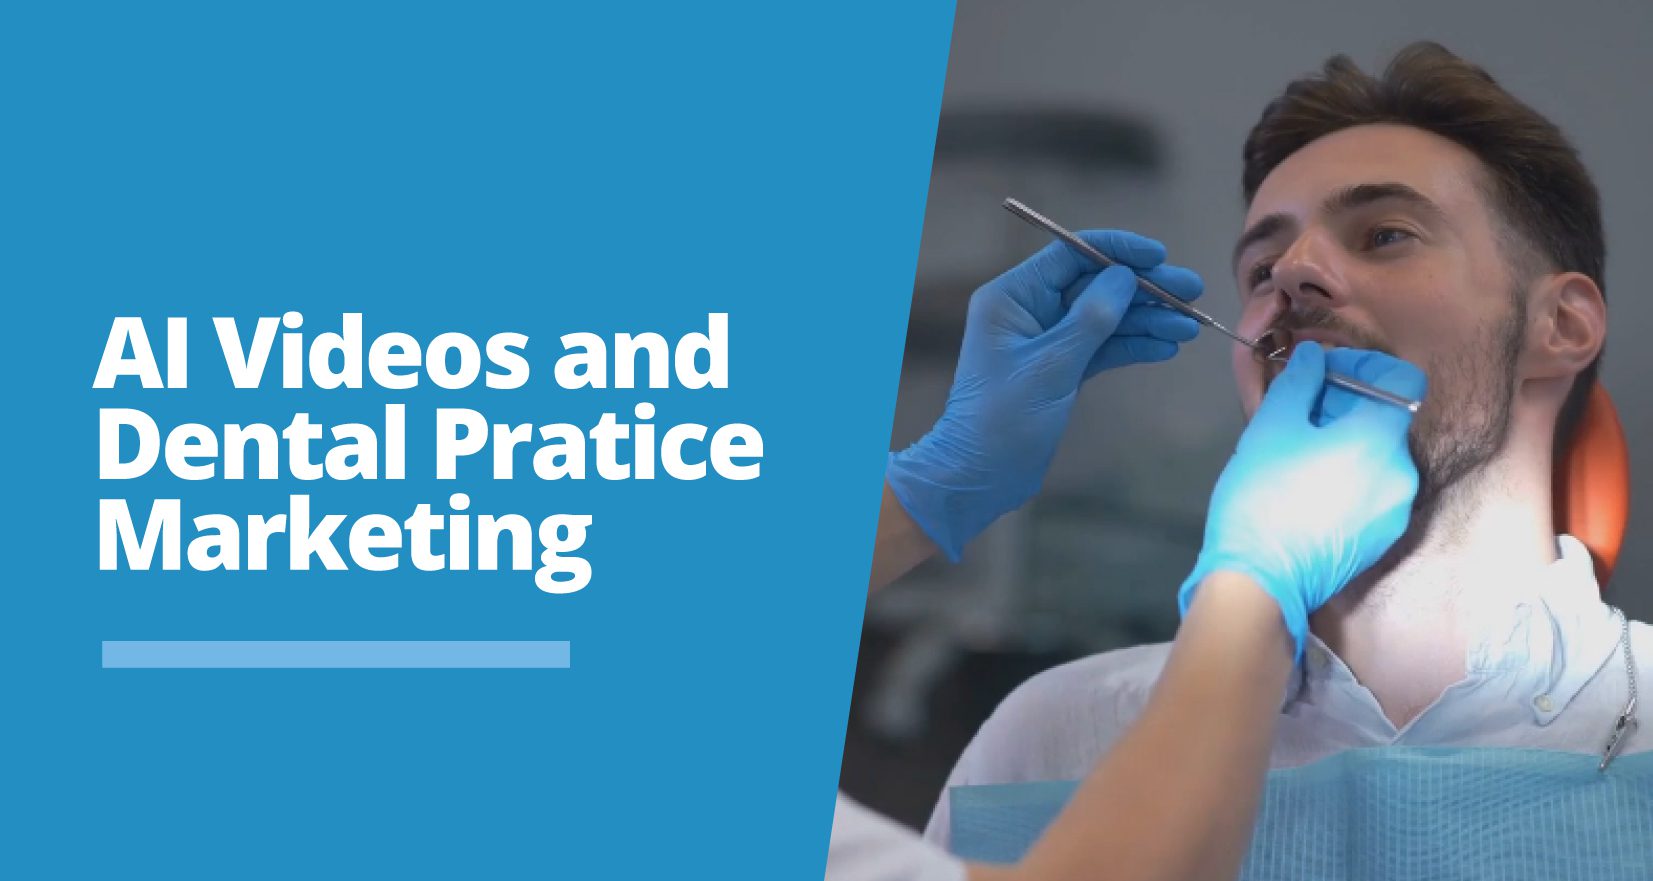 dental practice marketing with AI